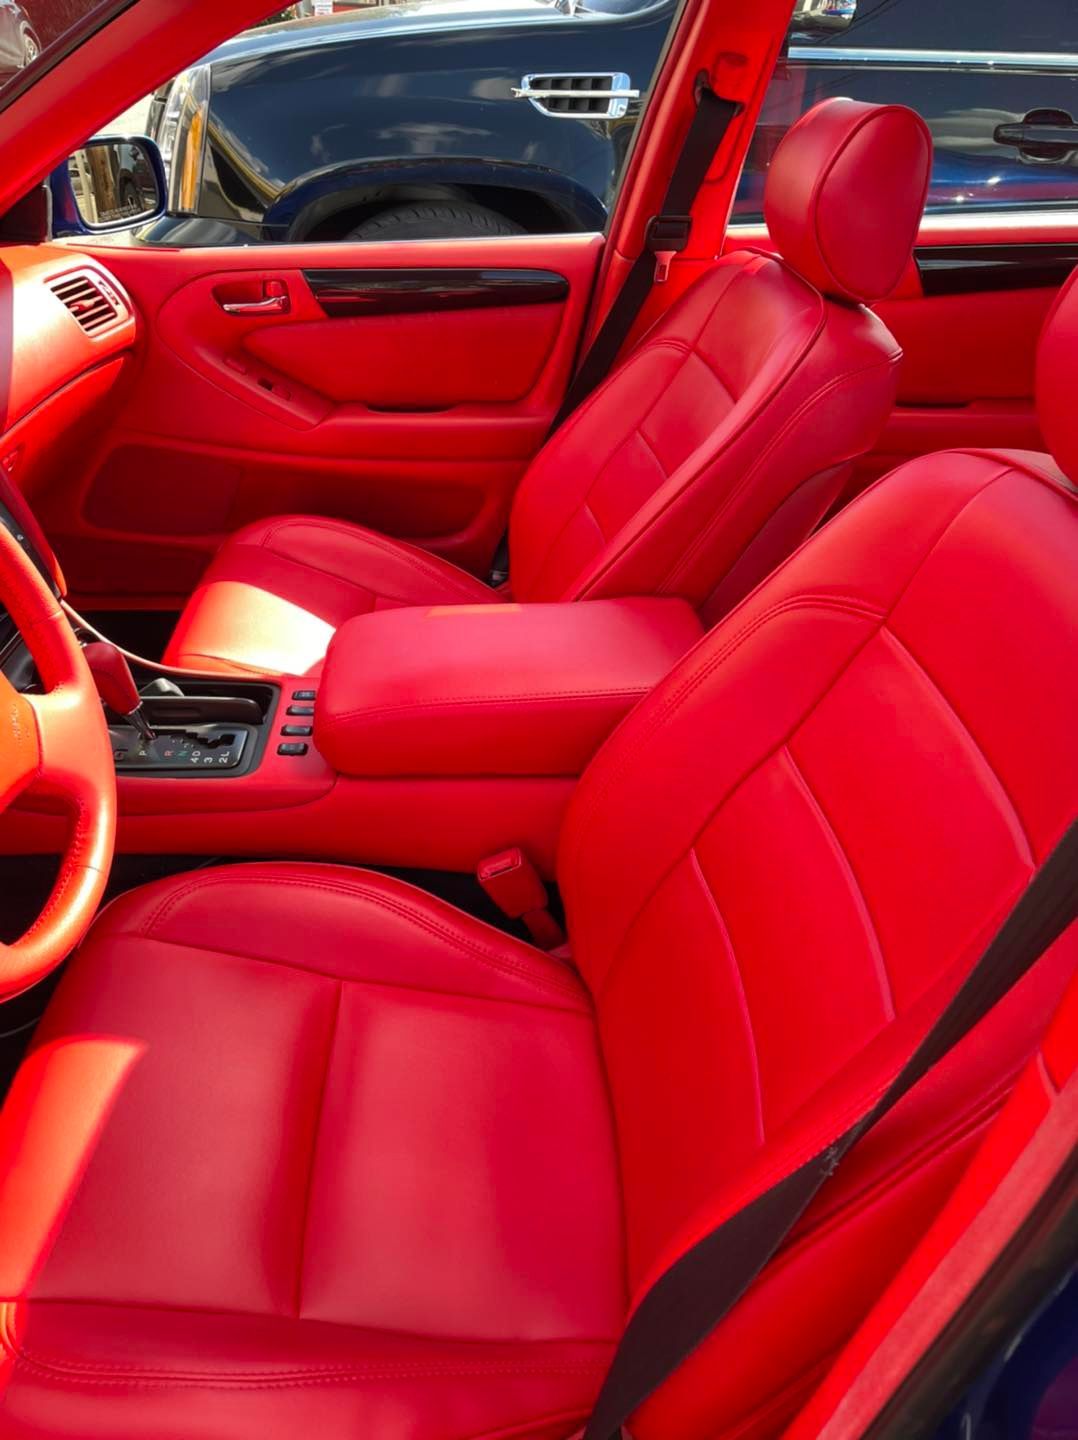 The inside of a car with red seats and a steering wheel